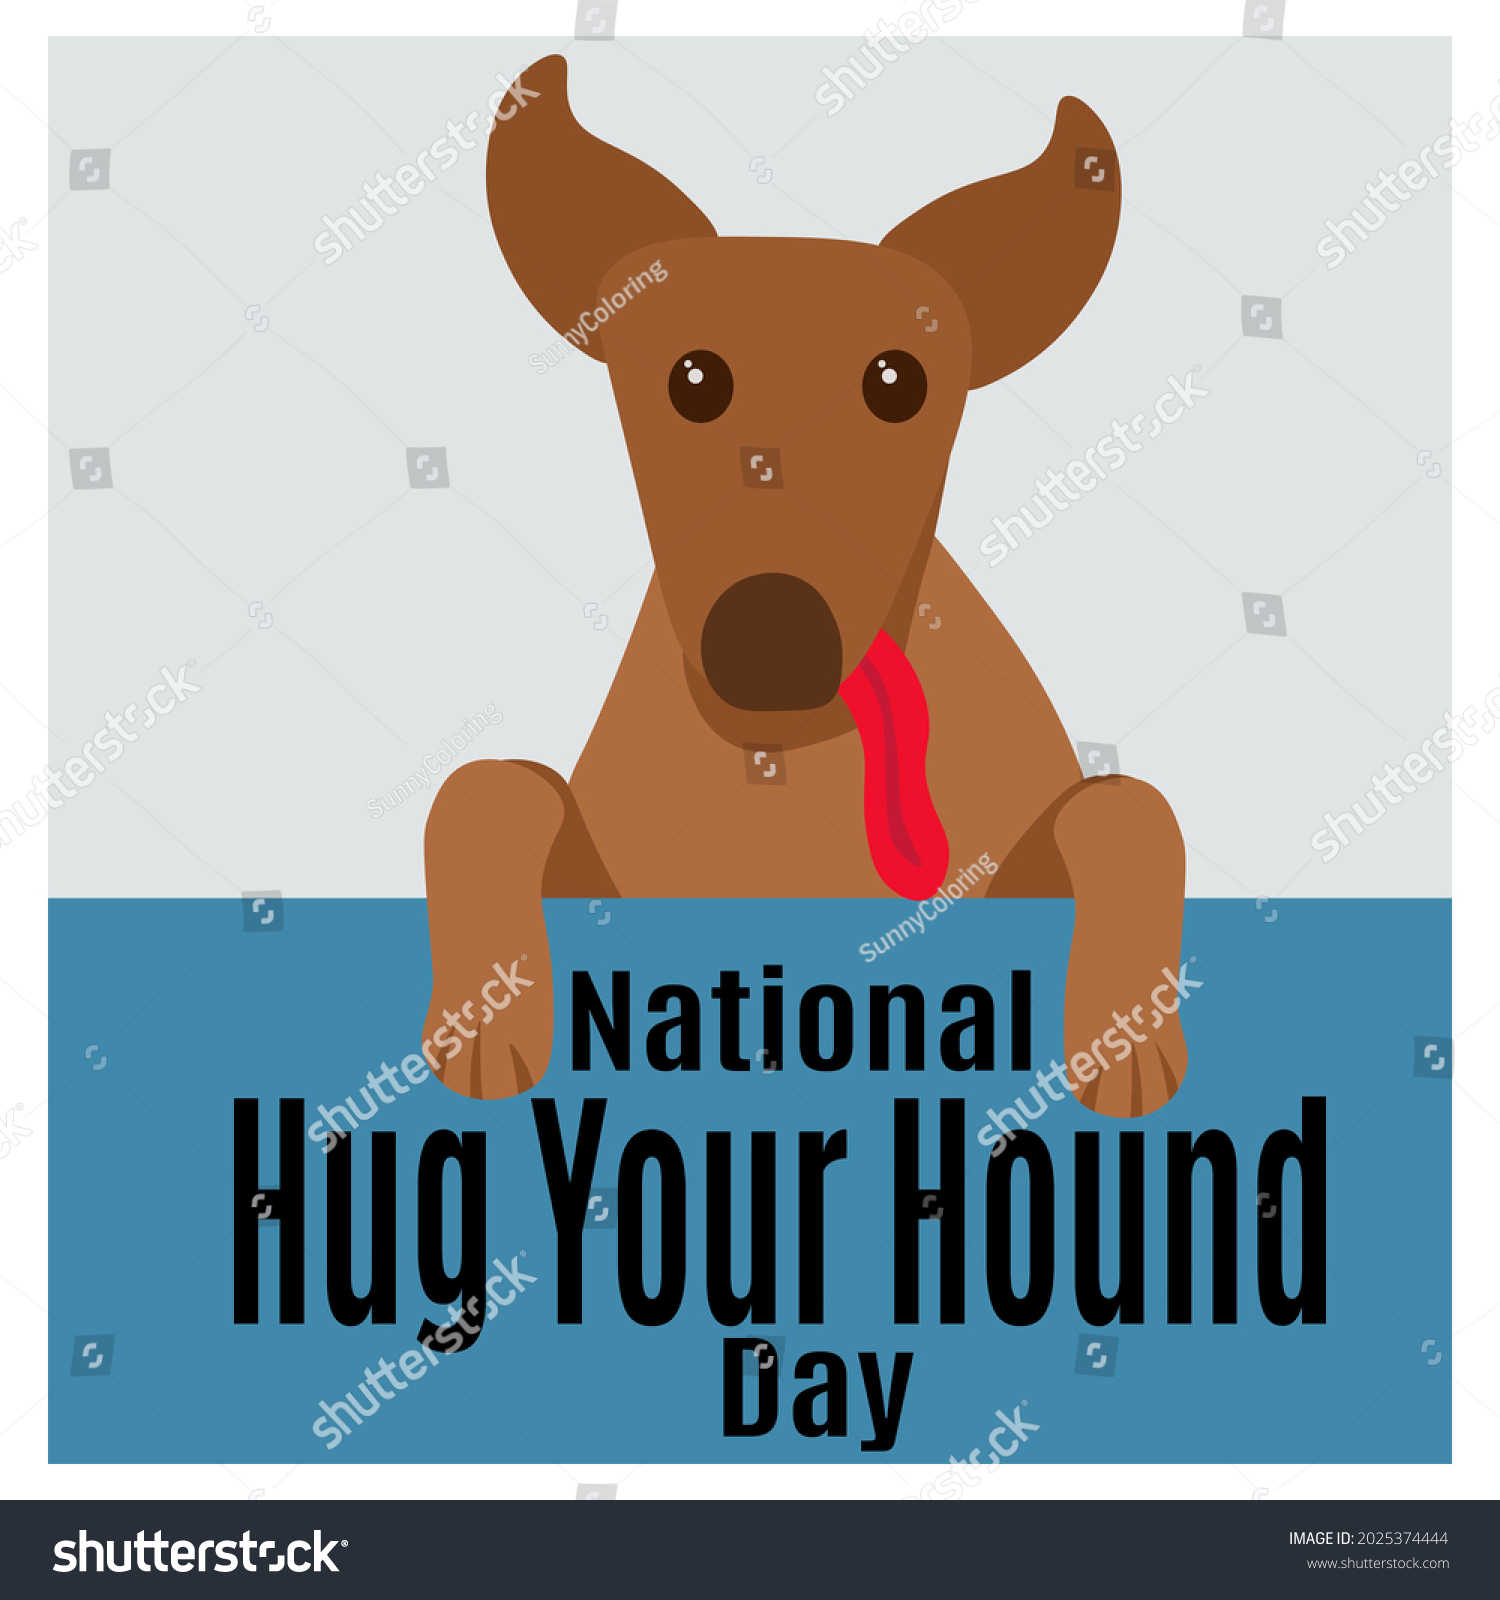 National Hug Your Hound Day Idea Stock Vector (Royalty Free) 2025374444